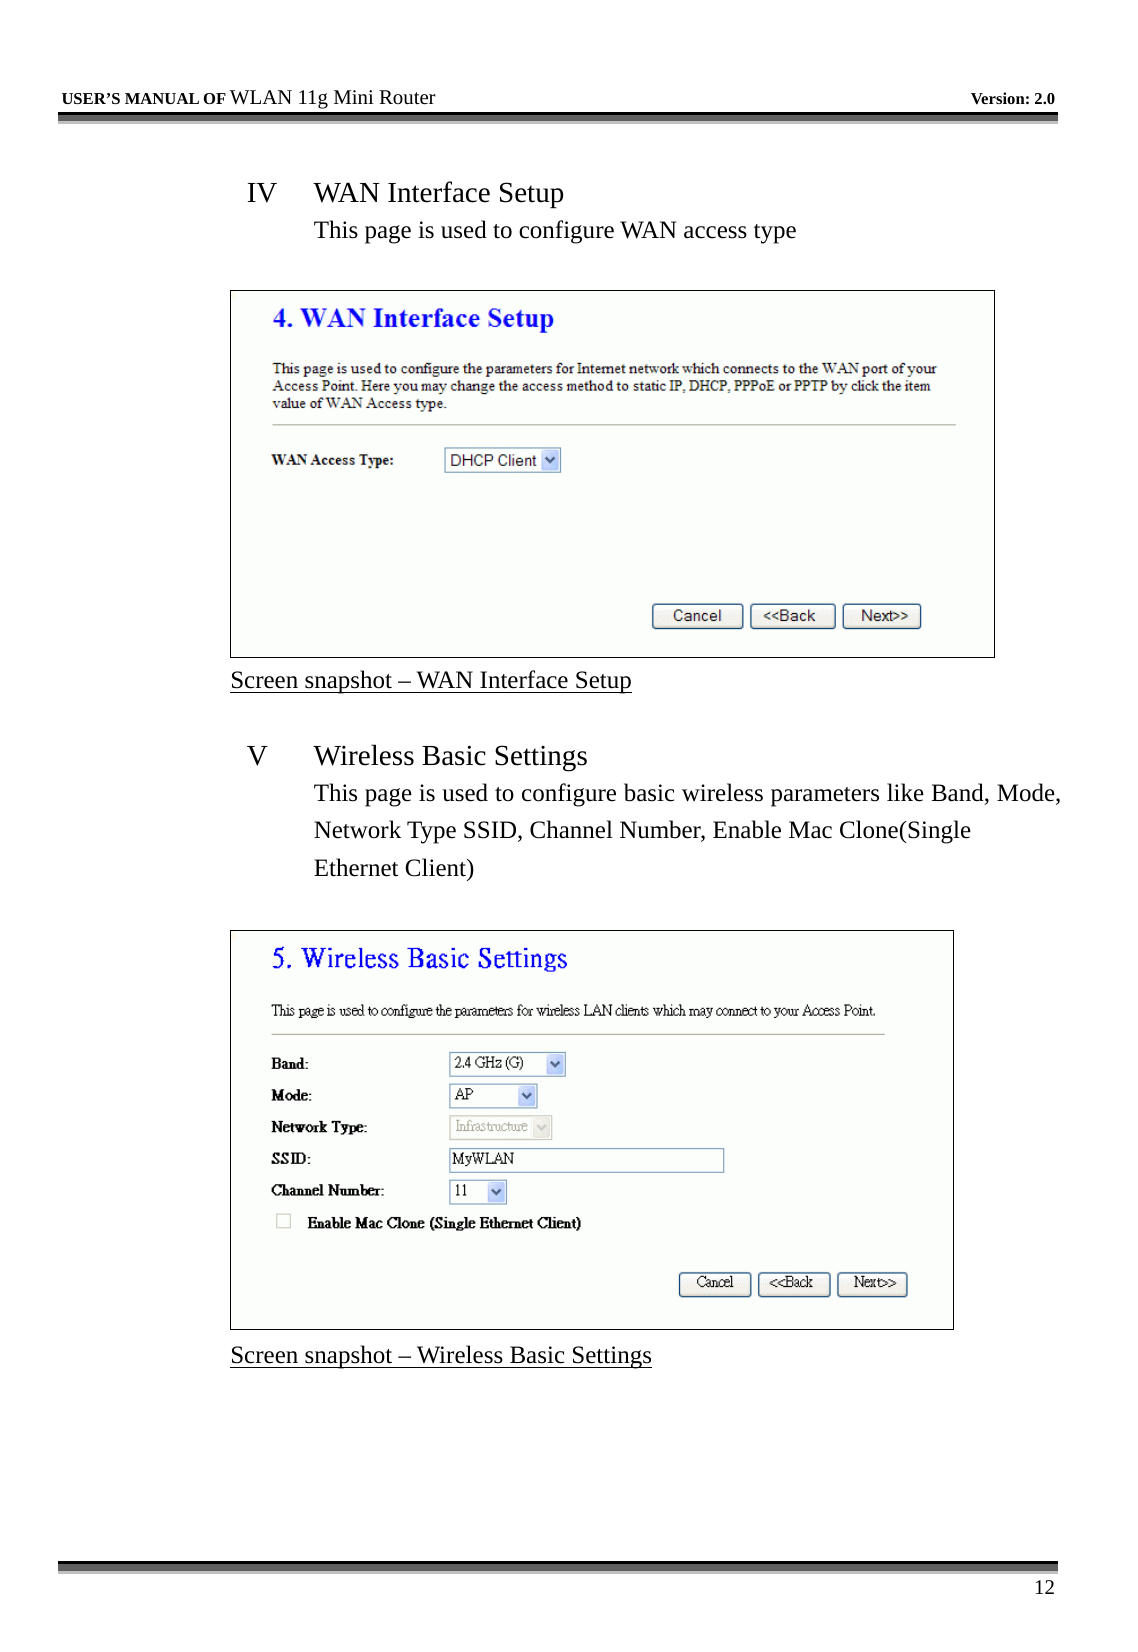   USER’S MANUAL OF WLAN 11g Mini Router   Version: 2.0     12  IV  WAN Interface Setup This page is used to configure WAN access type   Screen snapshot – WAN Interface Setup  V  Wireless Basic Settings This page is used to configure basic wireless parameters like Band, Mode, Network Type SSID, Channel Number, Enable Mac Clone(Single Ethernet Client)   Screen snapshot – Wireless Basic Settings  